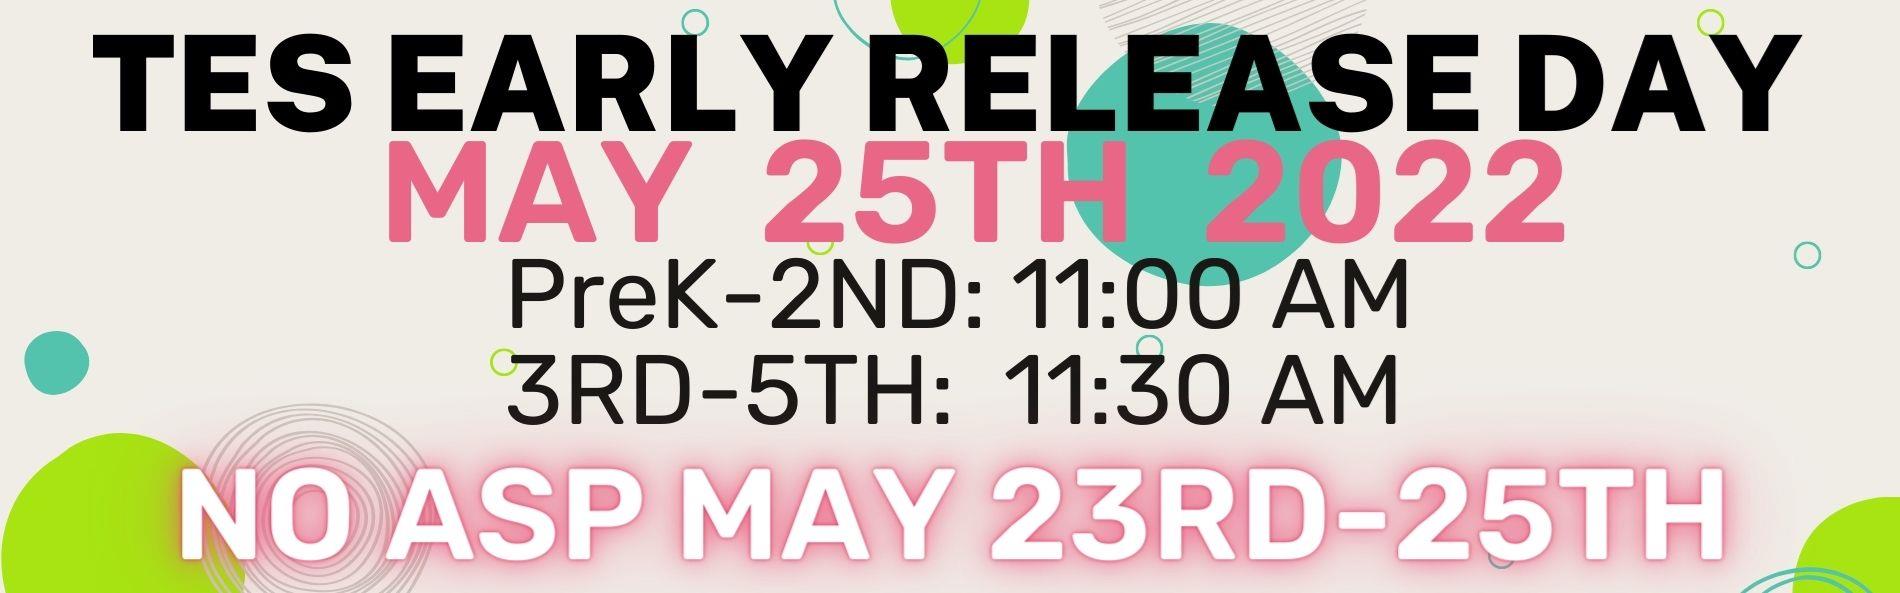 MAY EARLY RELEASE DAY